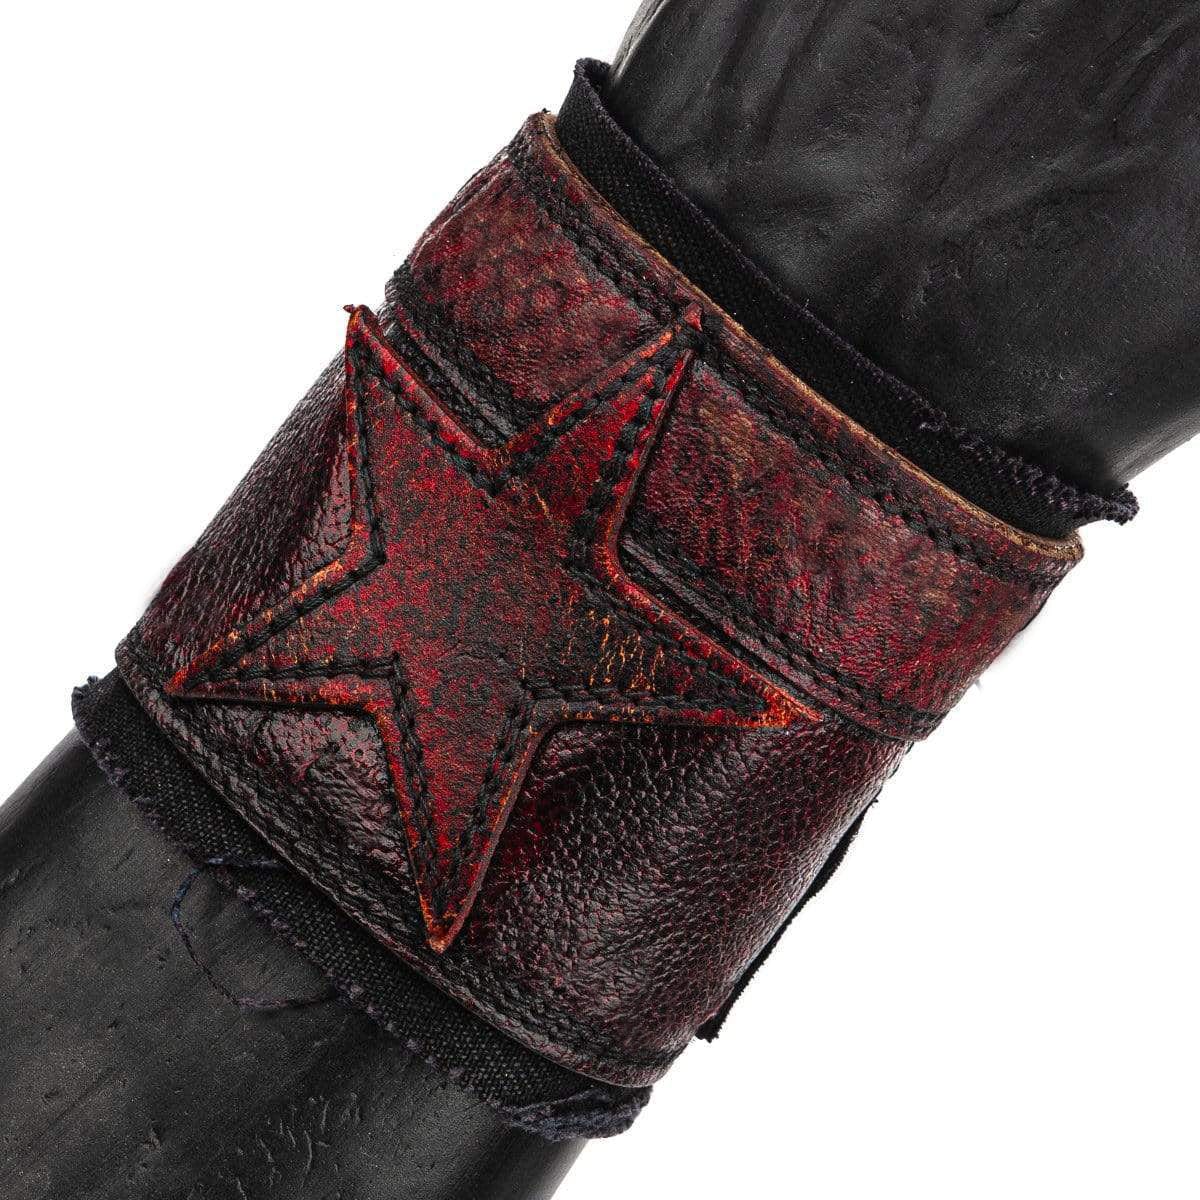 • Wornstar Custom Salvaged Collection• Custom leather wrist band• Completely hand-made at the time of order• Designed, made, and sold exclusively by Wornstar Clothing• Each one will vary slightly • Made with soft leather• Lined with fabric for comfort• Hand-stitched detail• Hand-painted• Hand-distressed• 